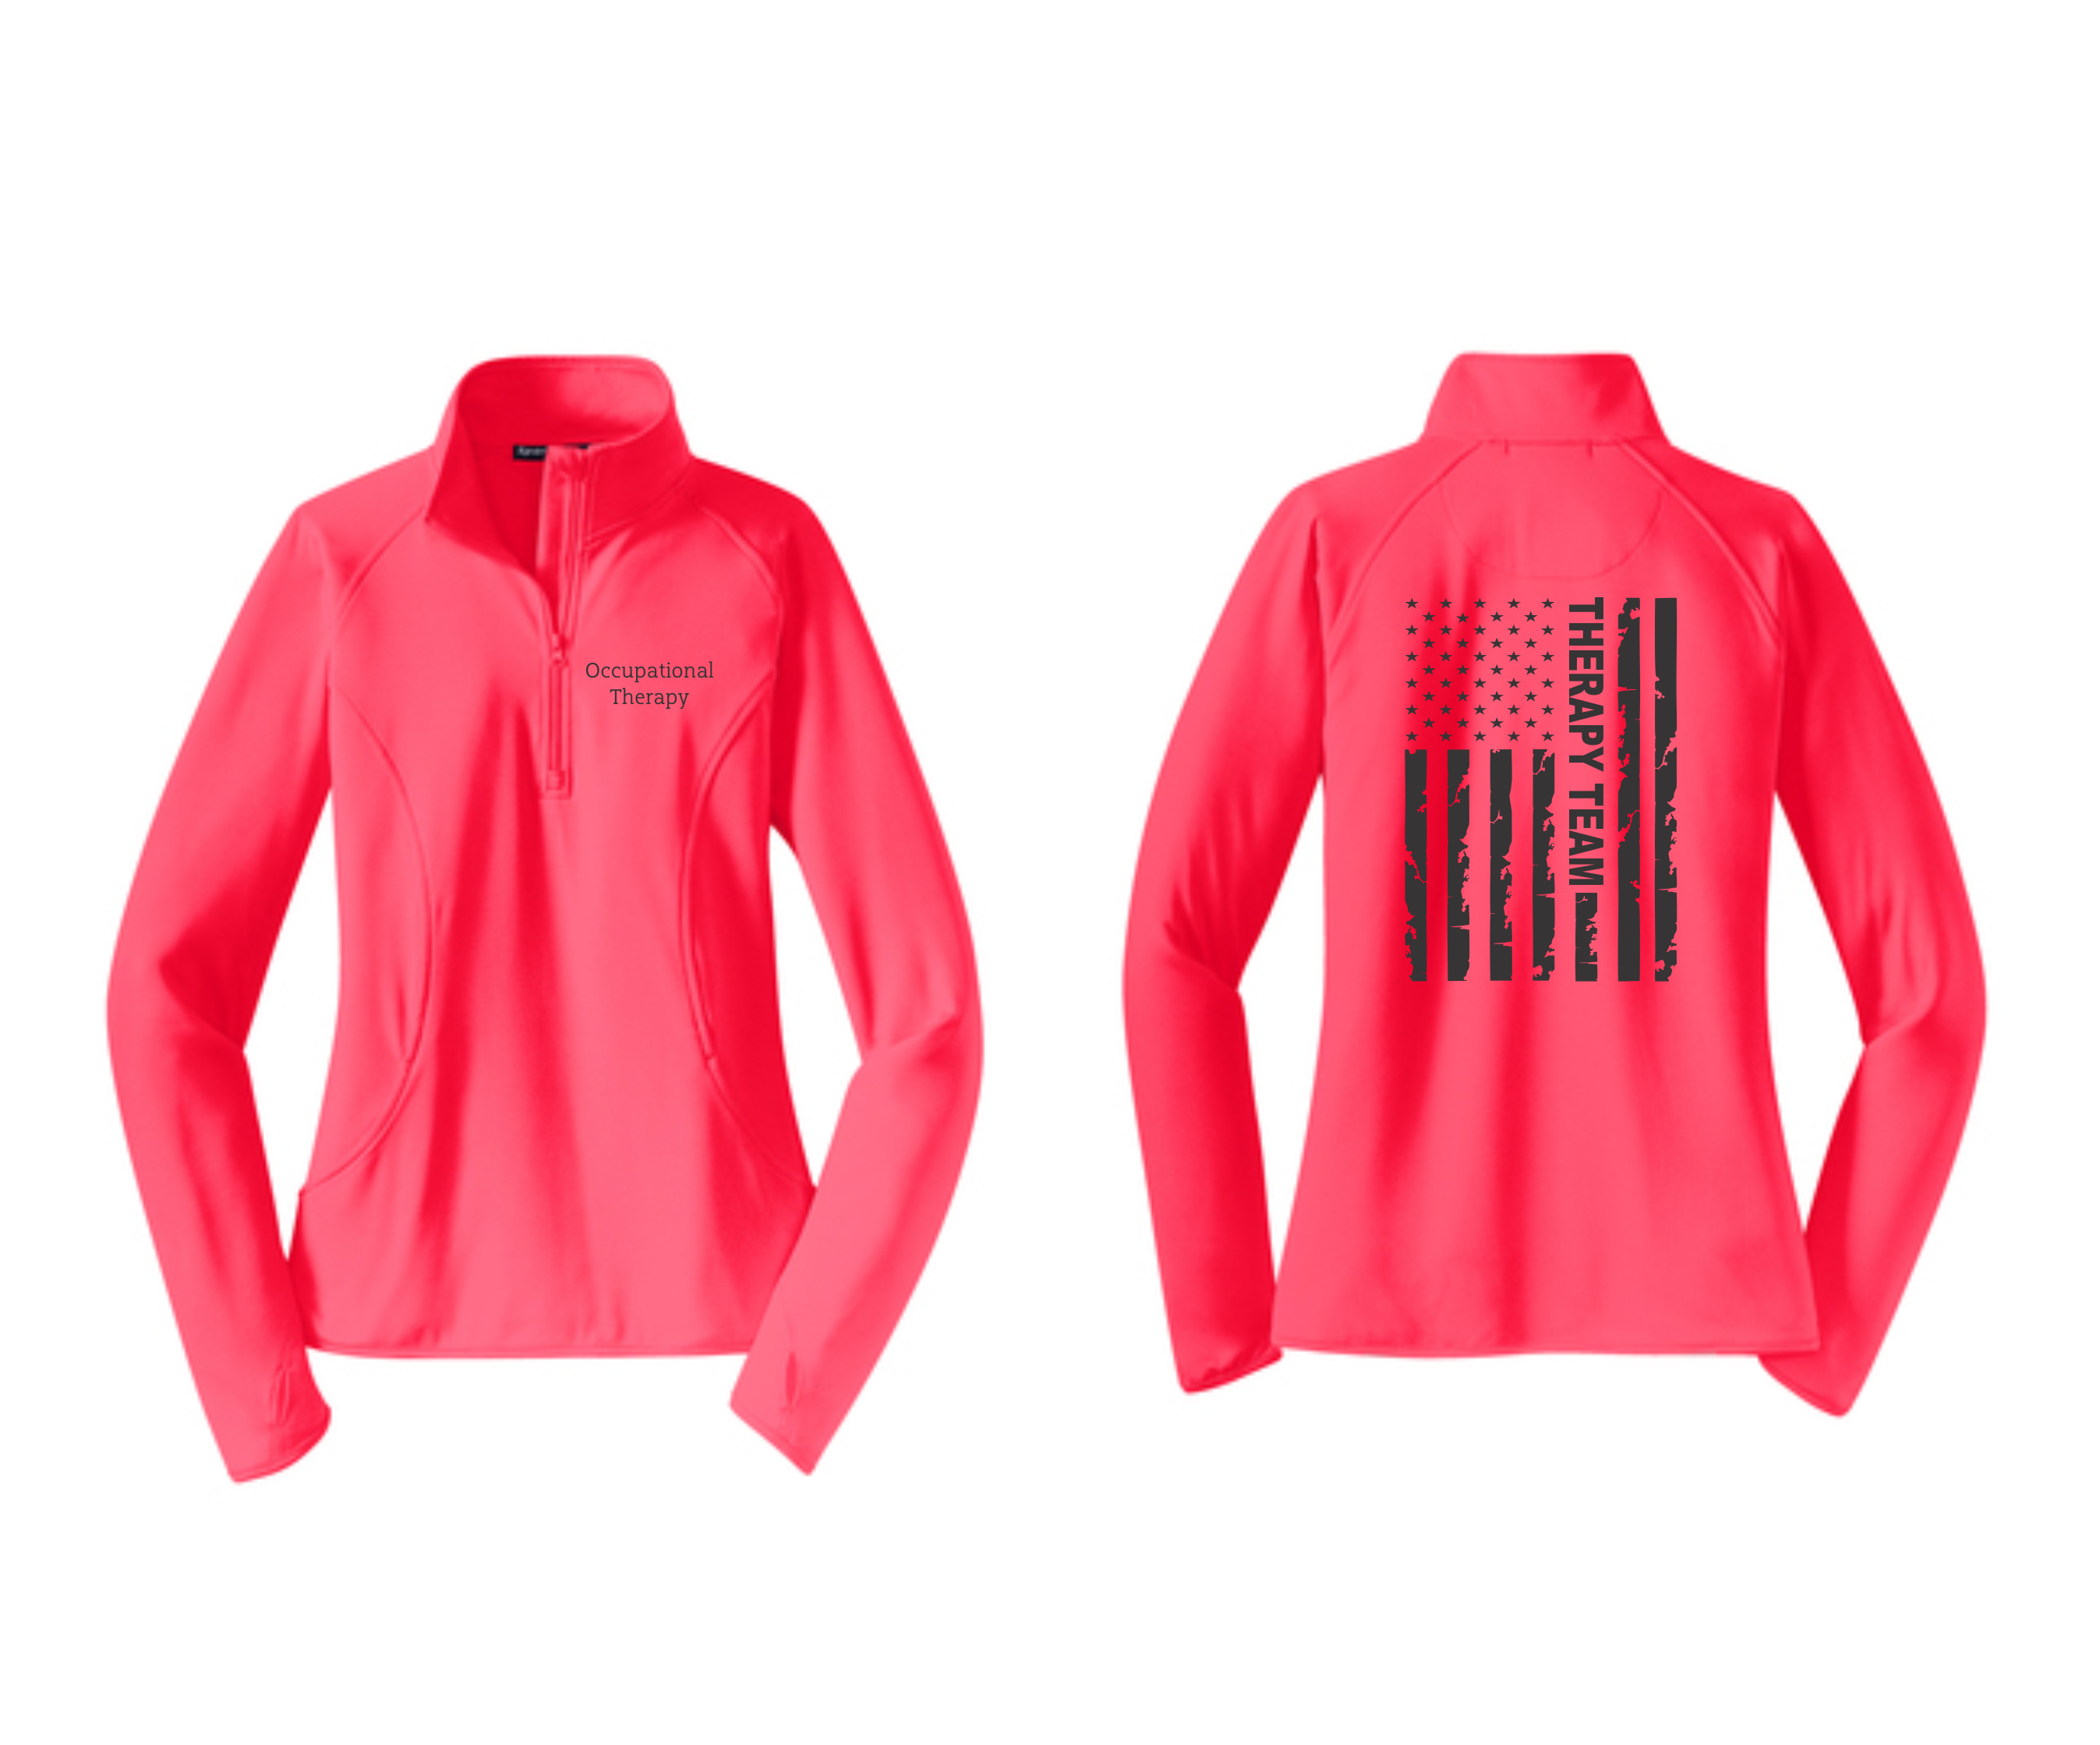 PHW - Occupational Therapy Flag - Ladies 1/2 or Full Zip Jacket